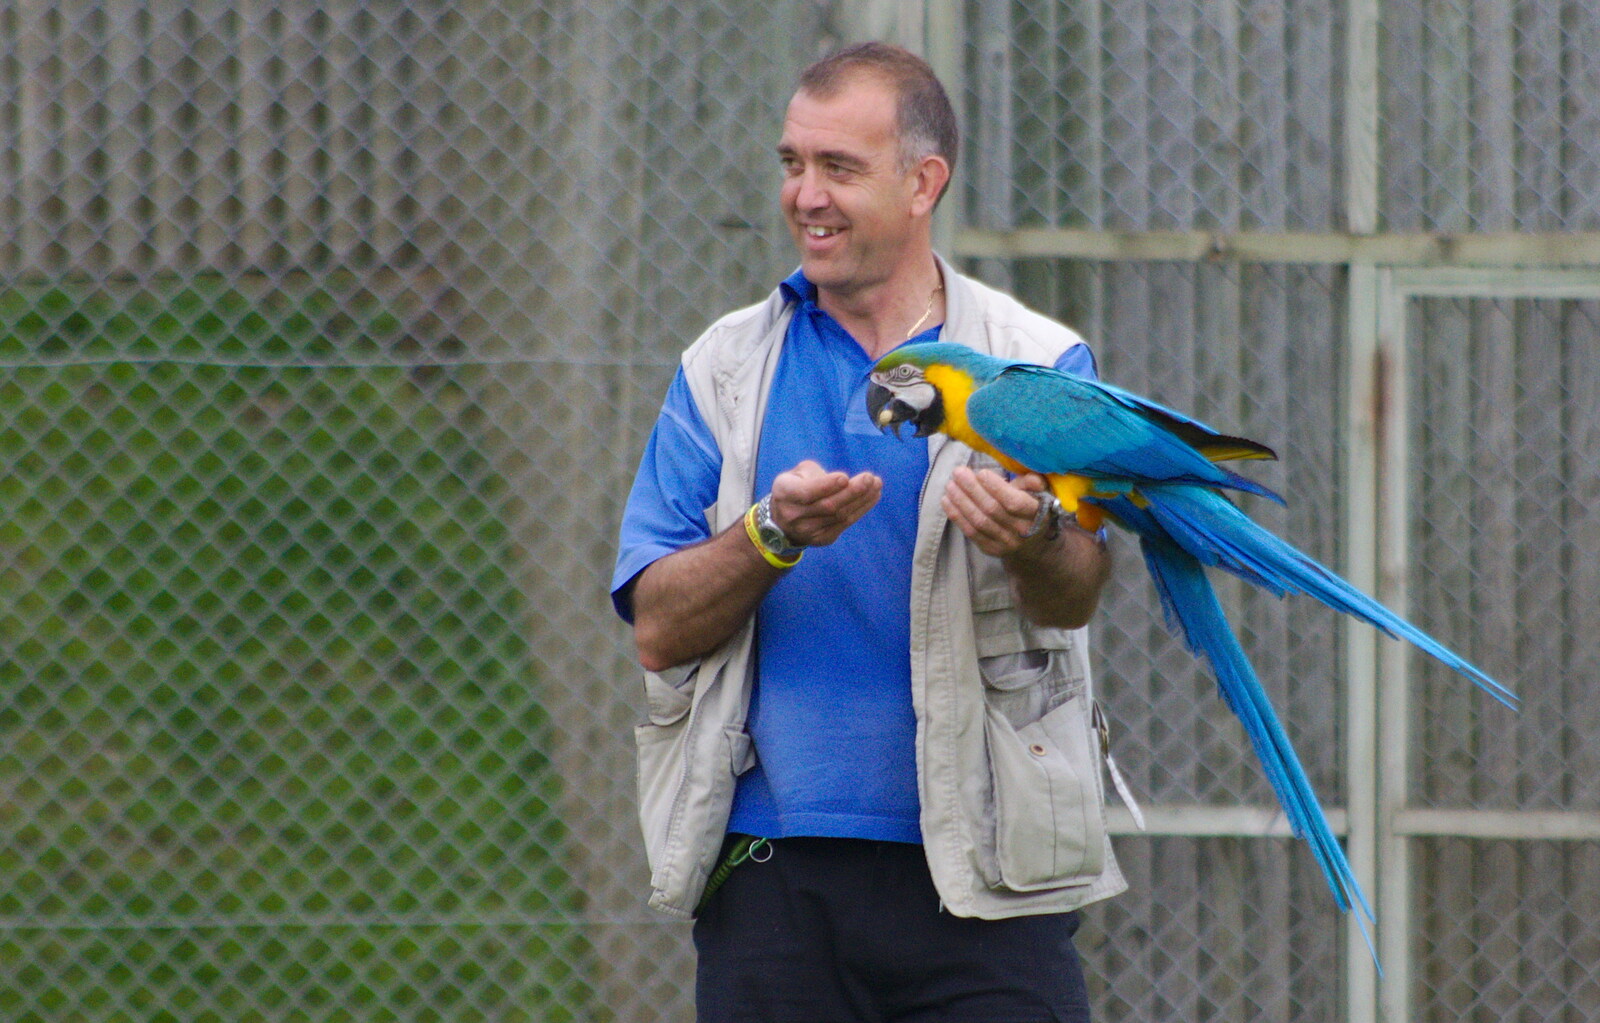 At the bird display, a parrot gets a treat from A Birthday Trip to the Zoo, Banham, Norfolk - 26th May 2014